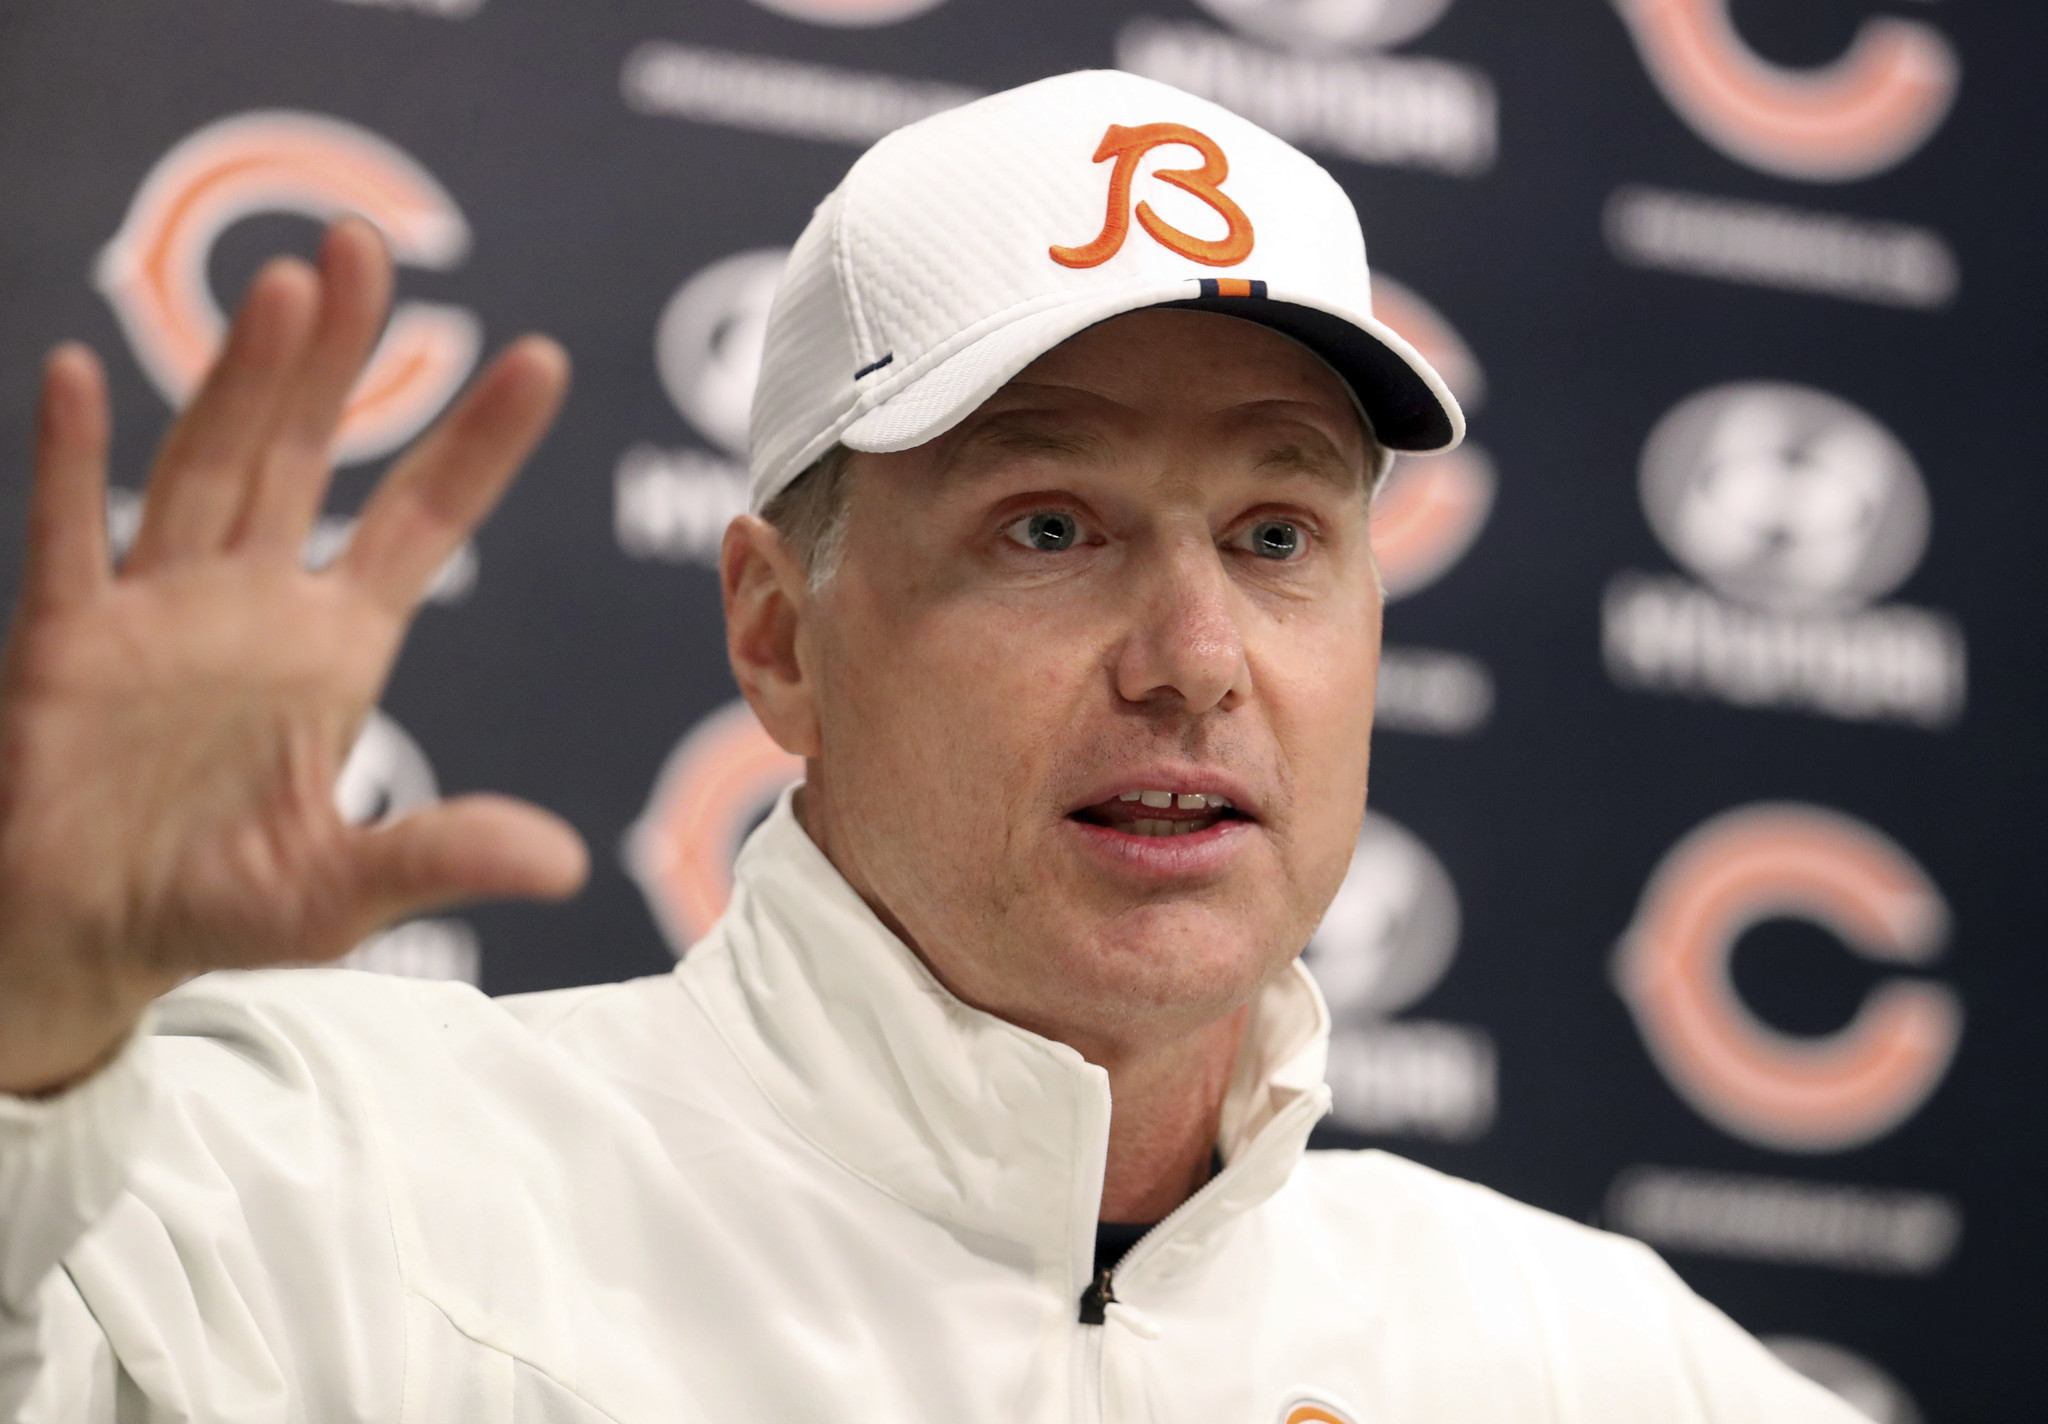 We know the Bears 2022 schedule now. Here's what you need to know